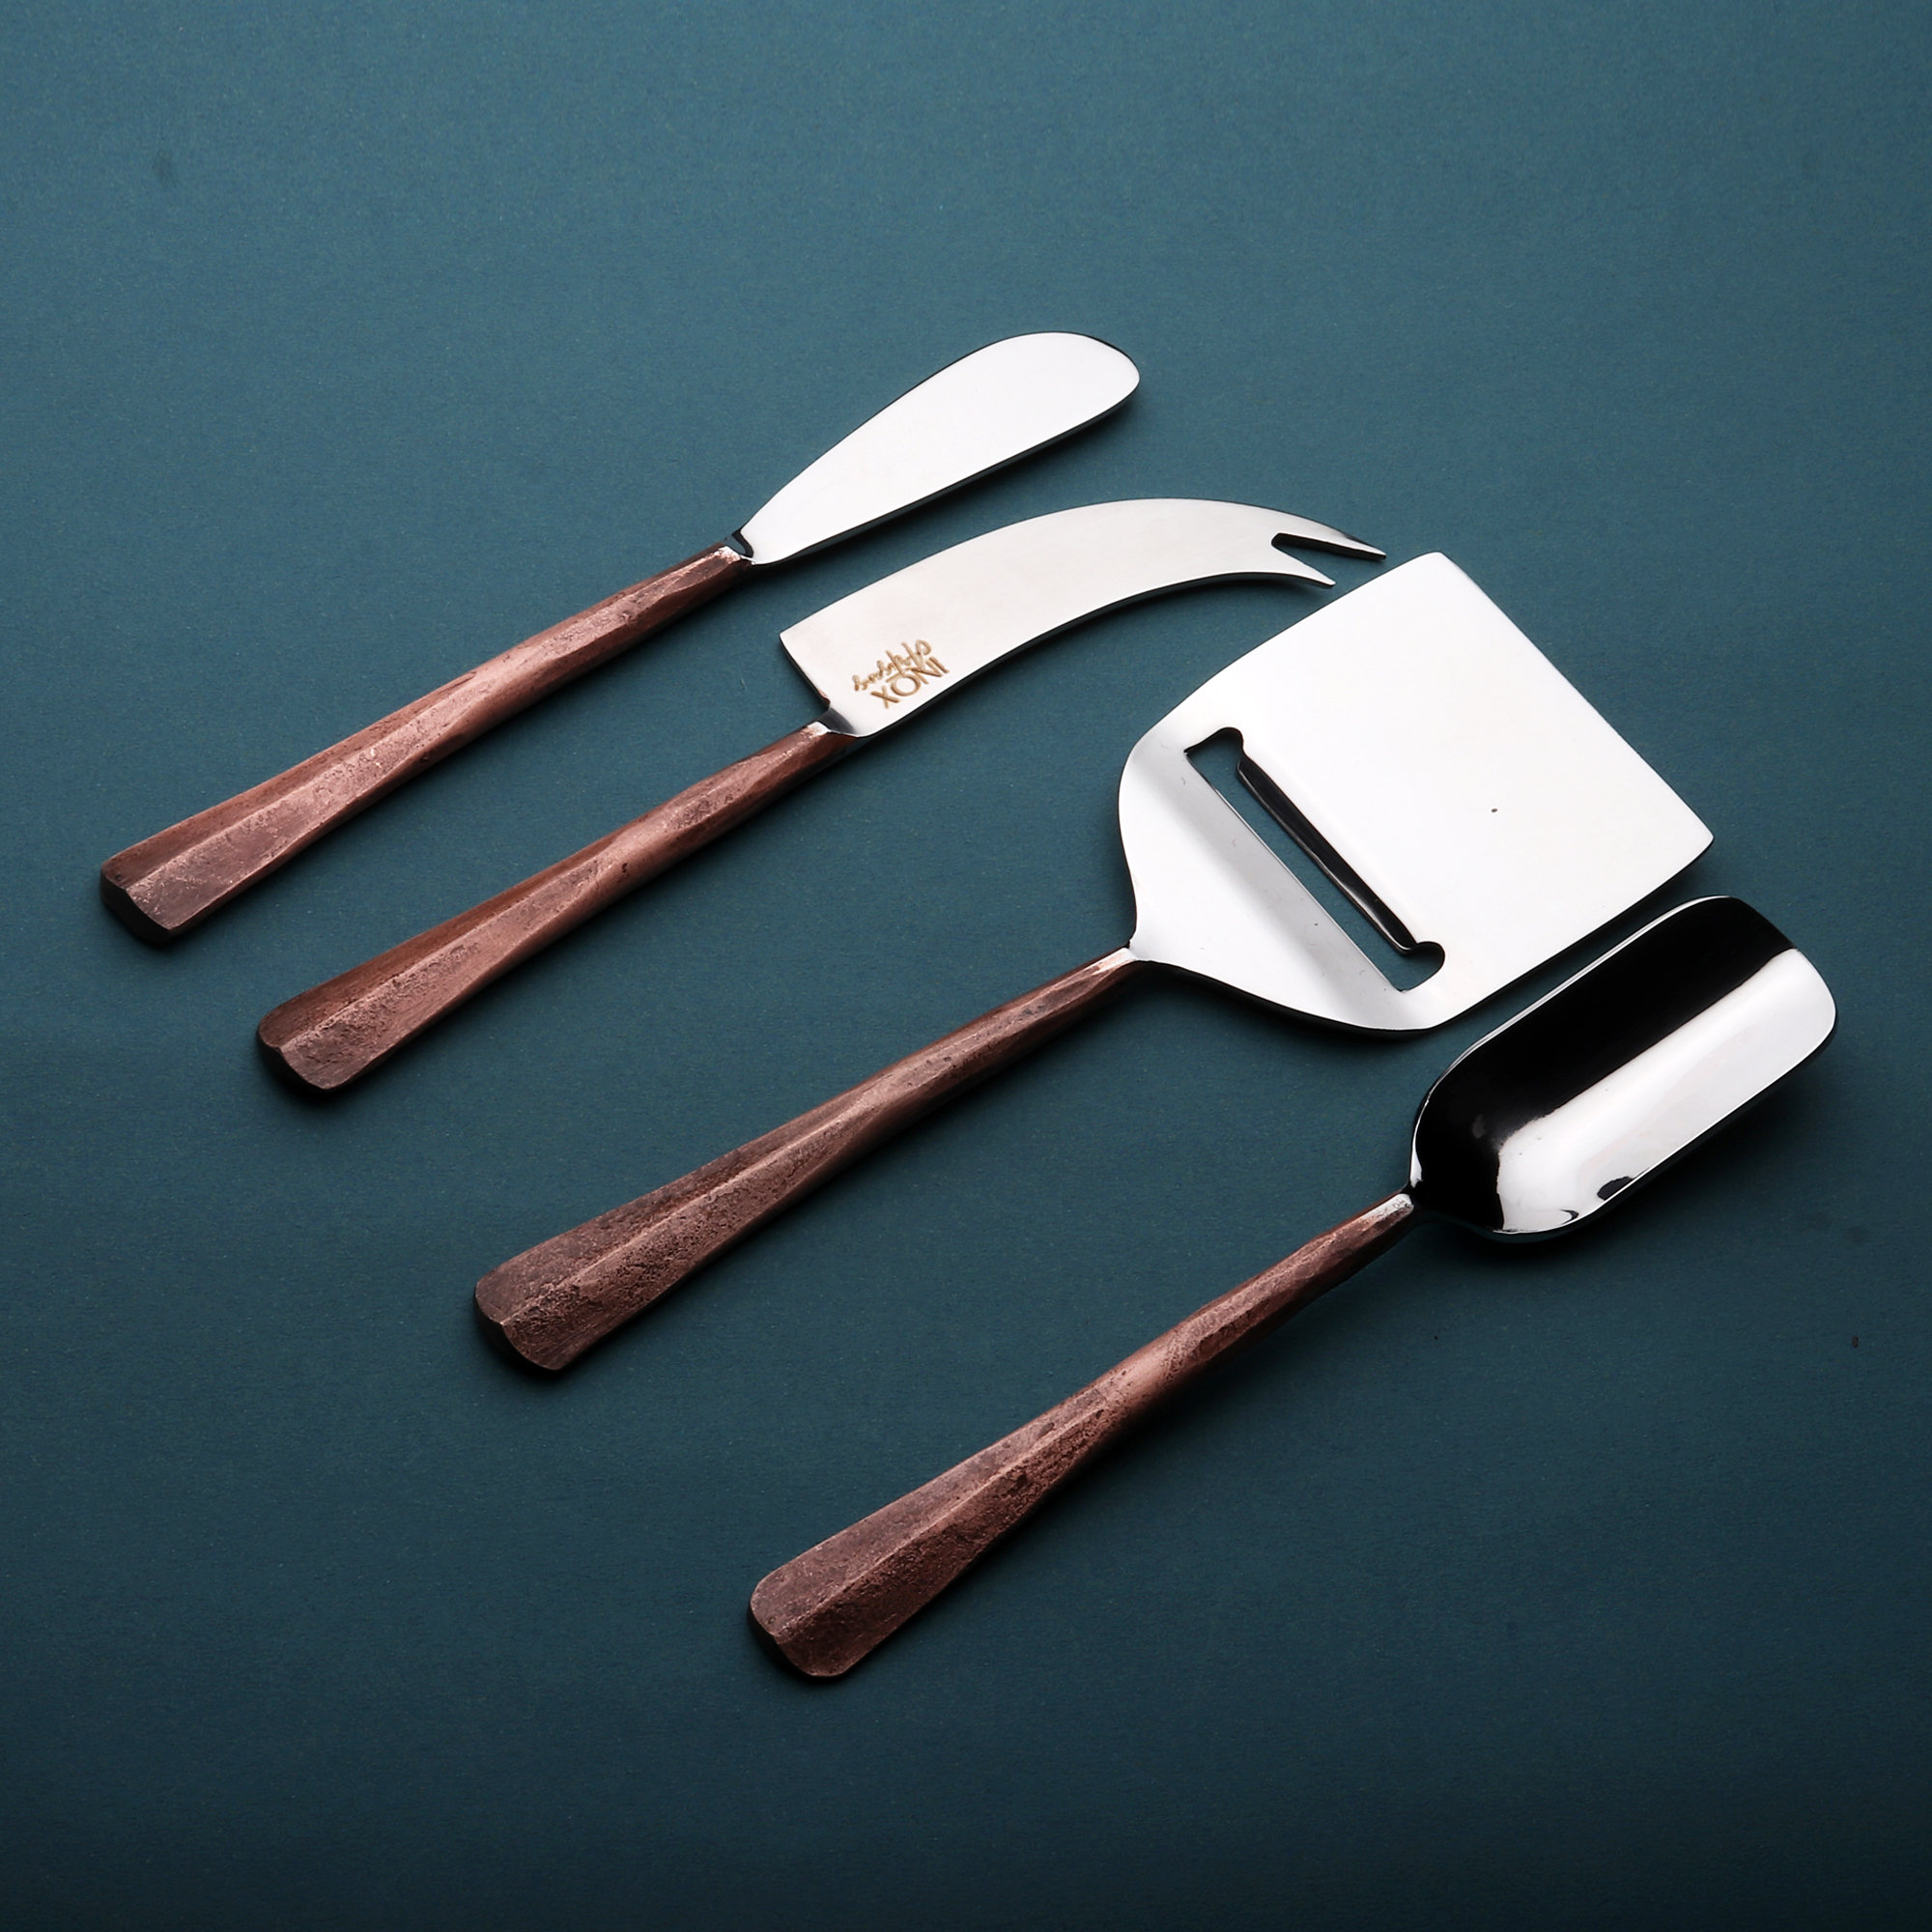 Cheese Knife Set (Hammered Square) - Handmade Hammered Stainless Steel